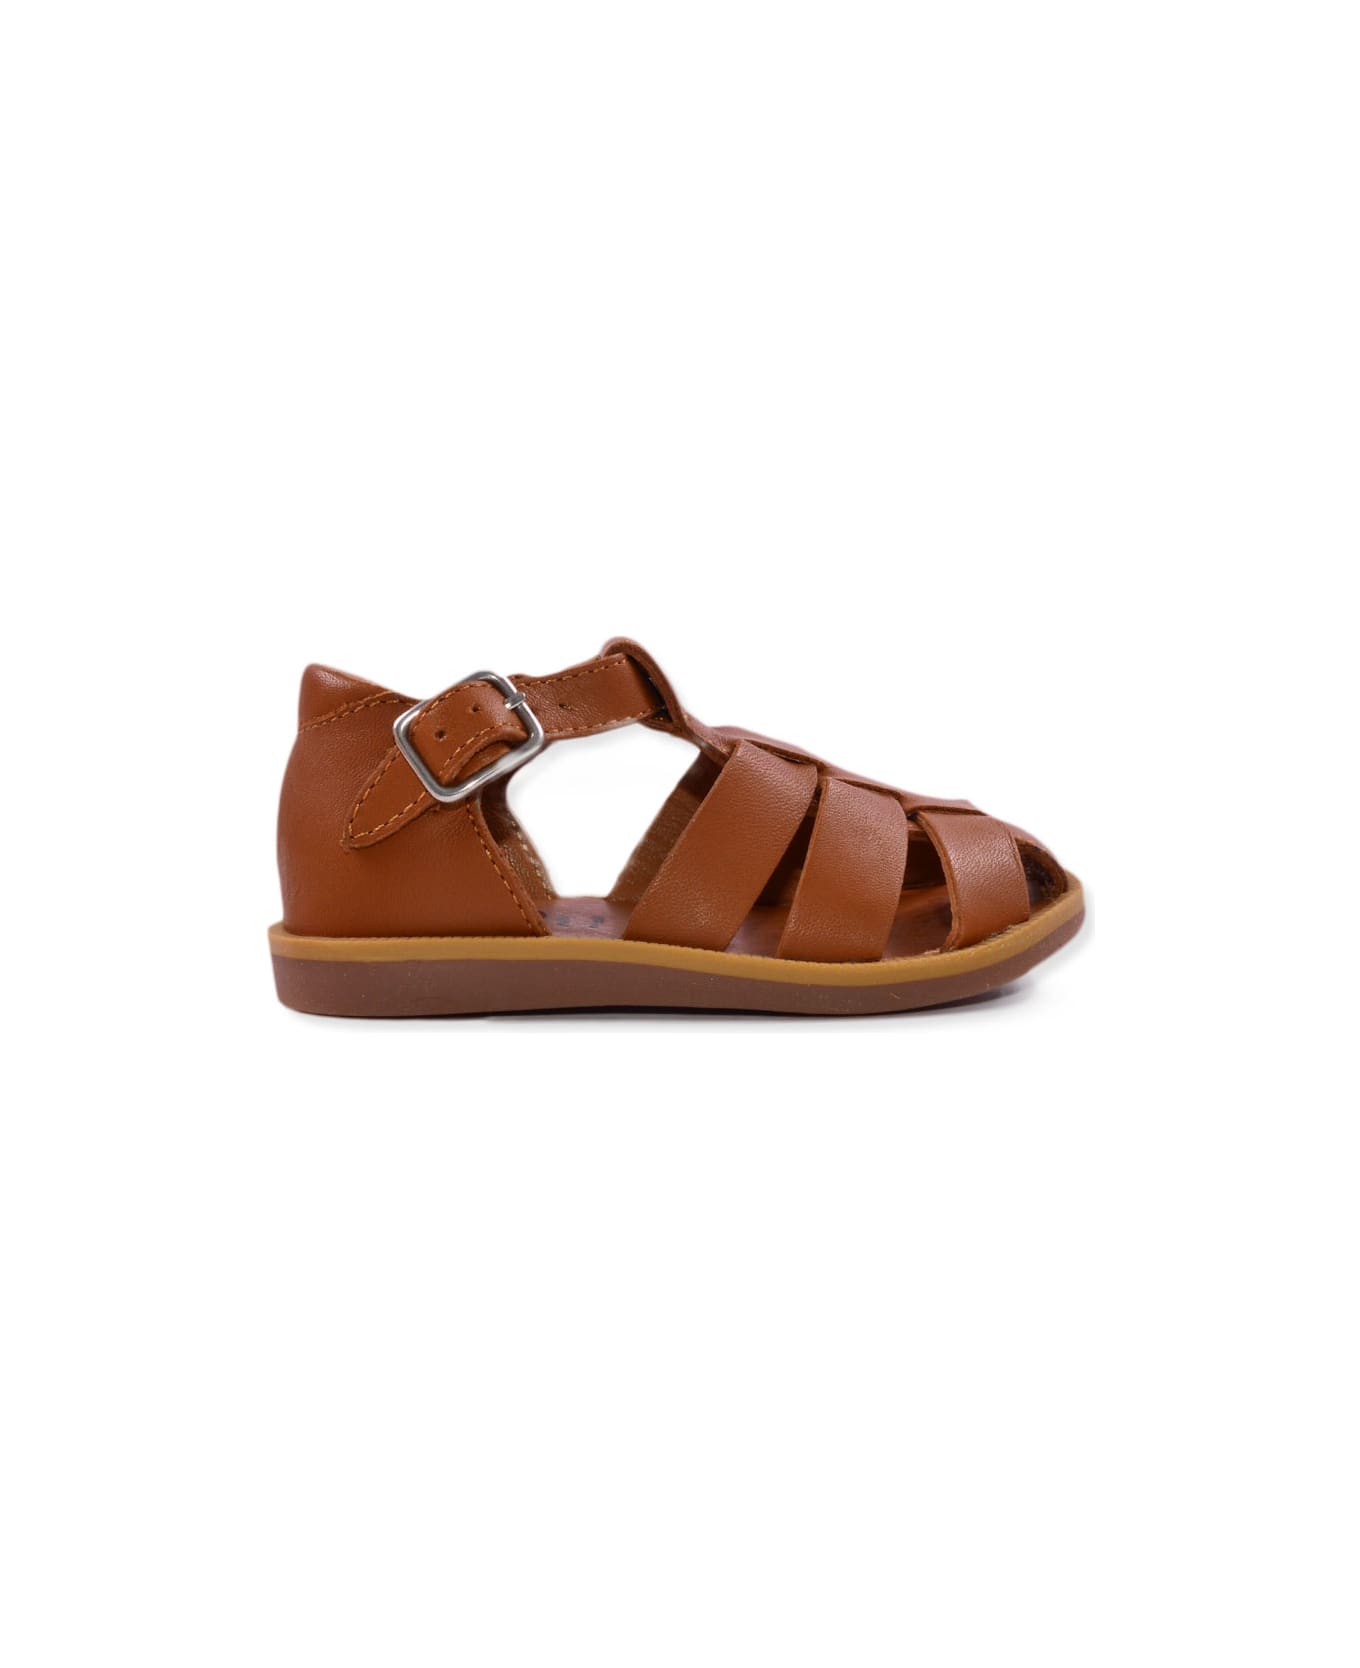 Pom d'Api Open Sandals In Smooth Leather - Brown